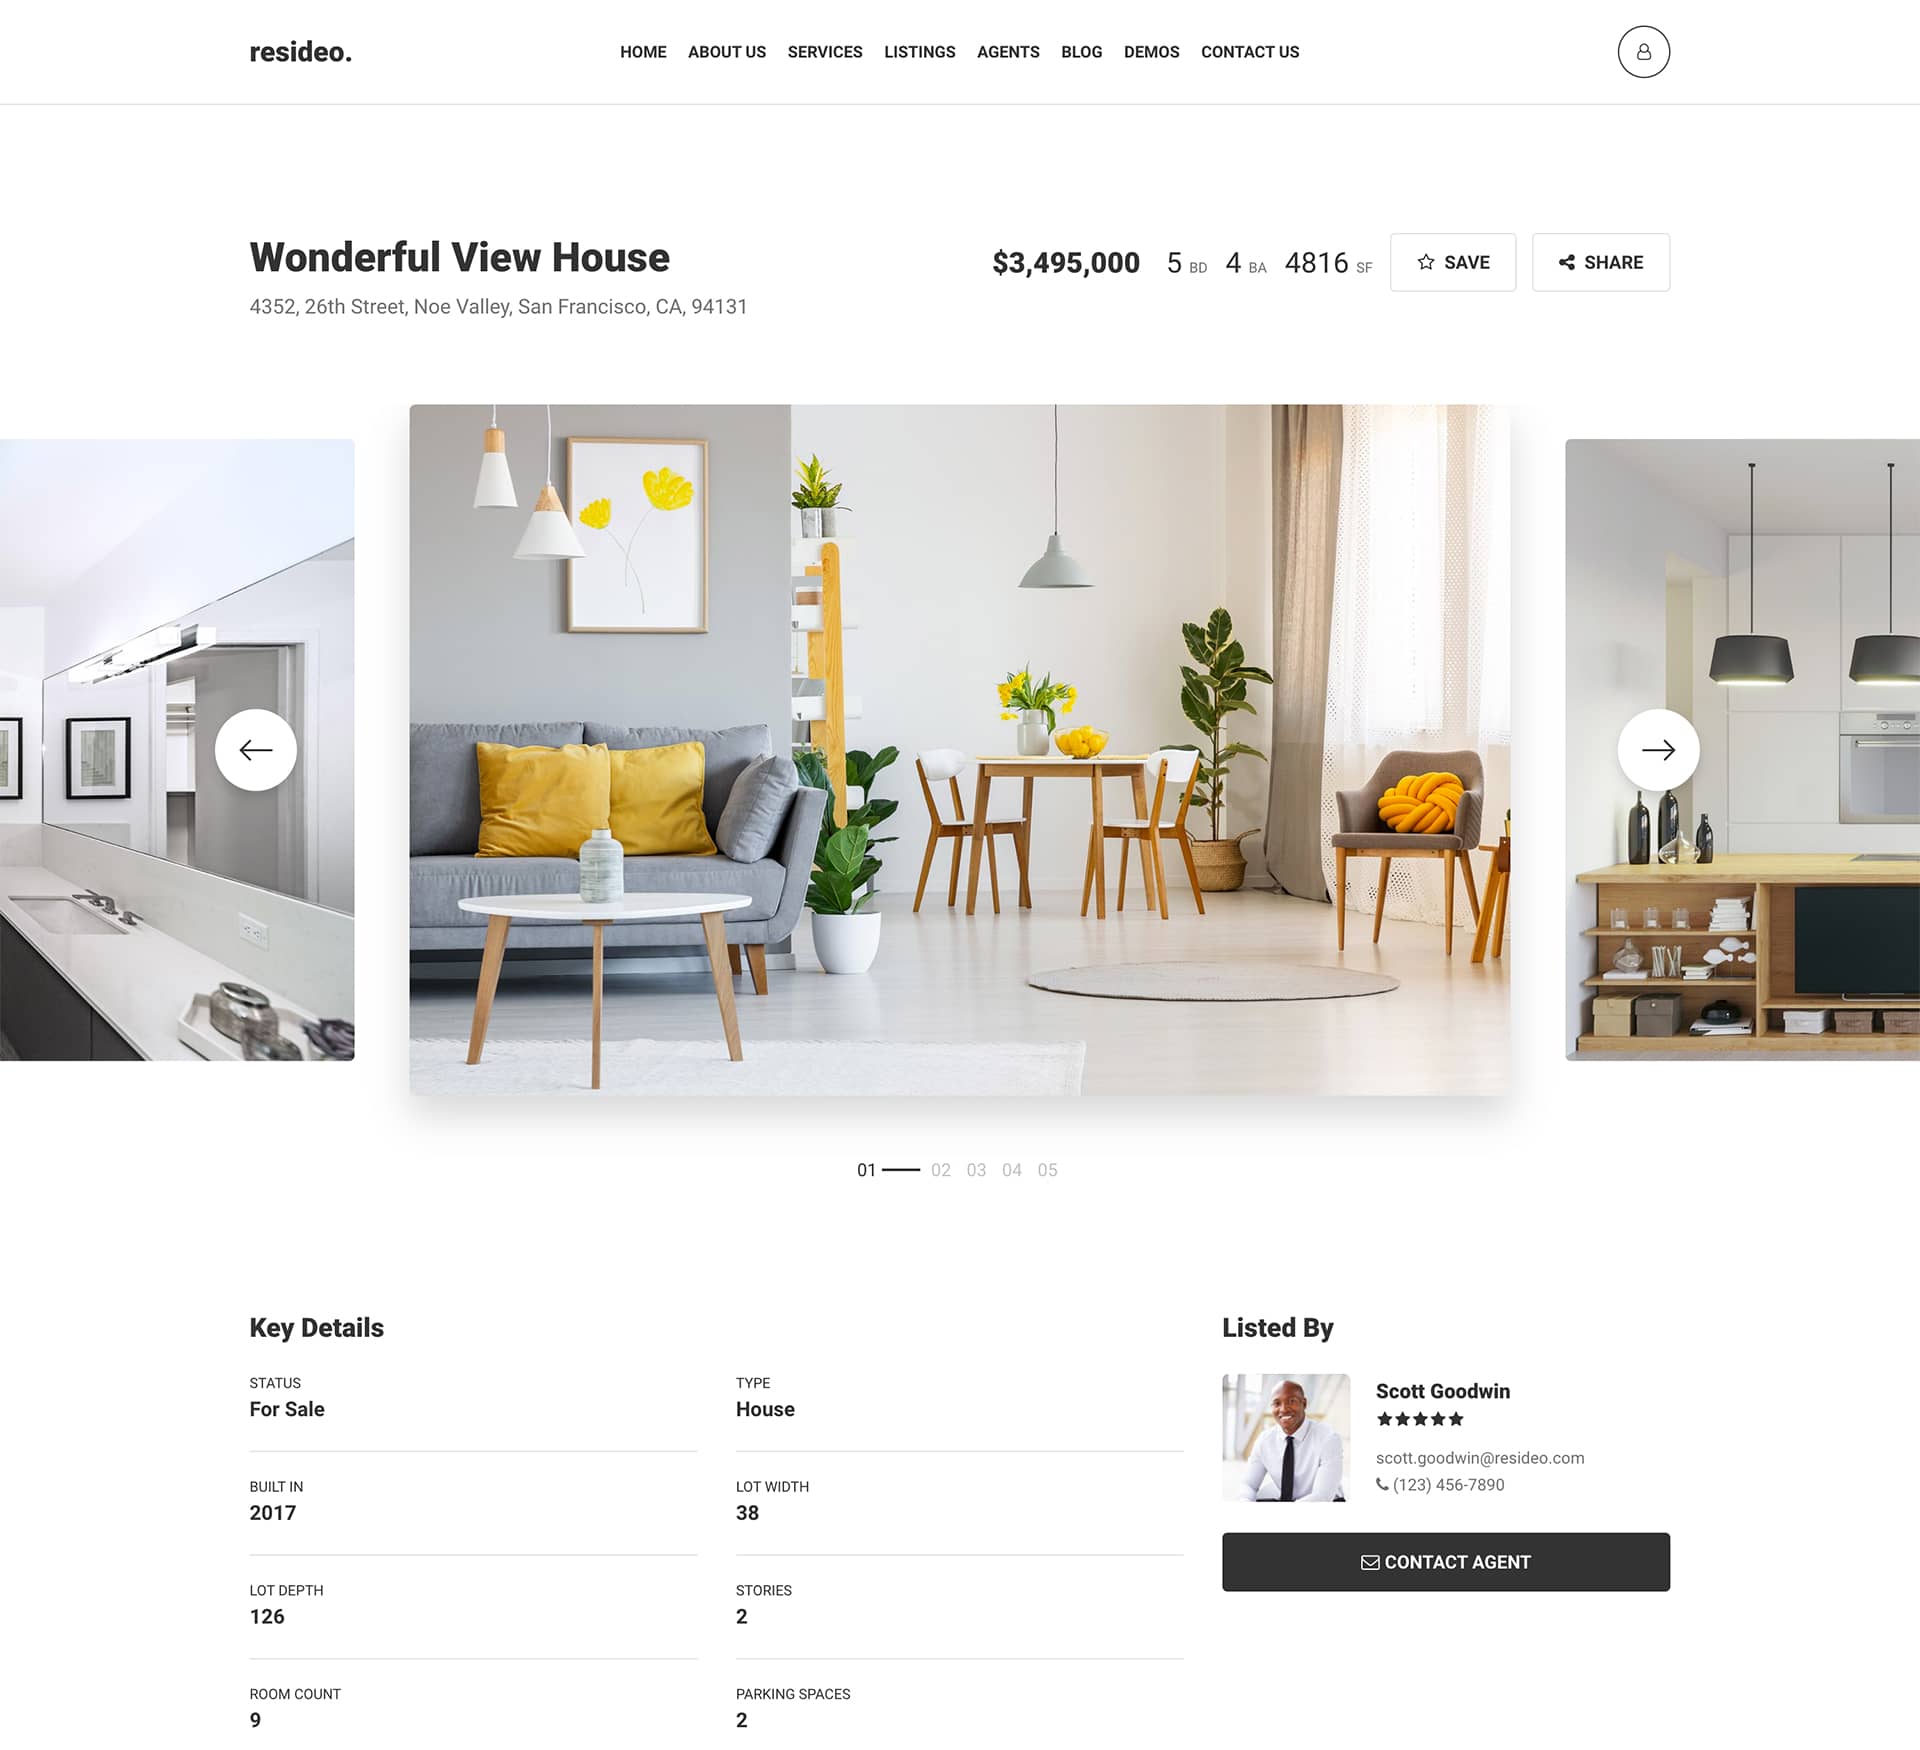 Resideo - Single property - Full width carousel | Title top